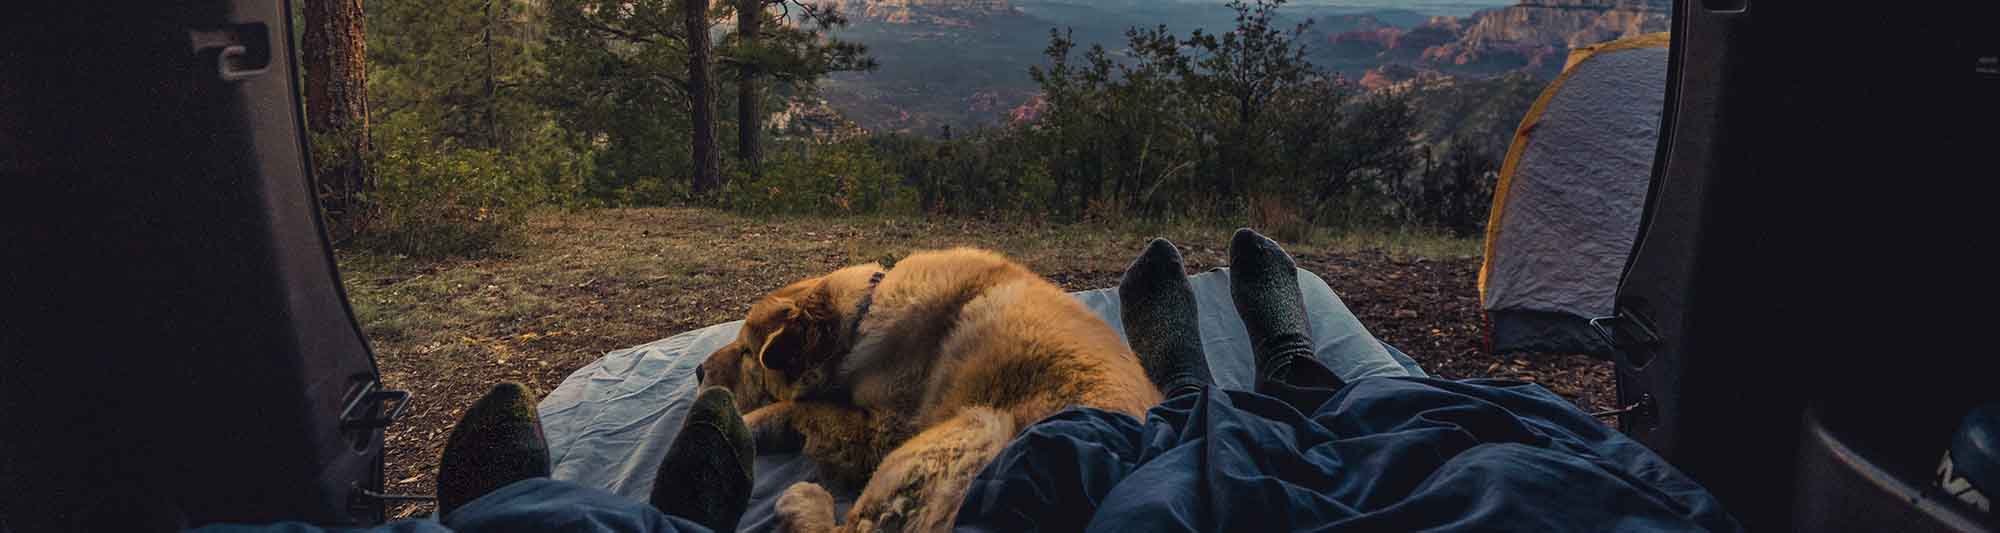 camping with a dog in the mountains